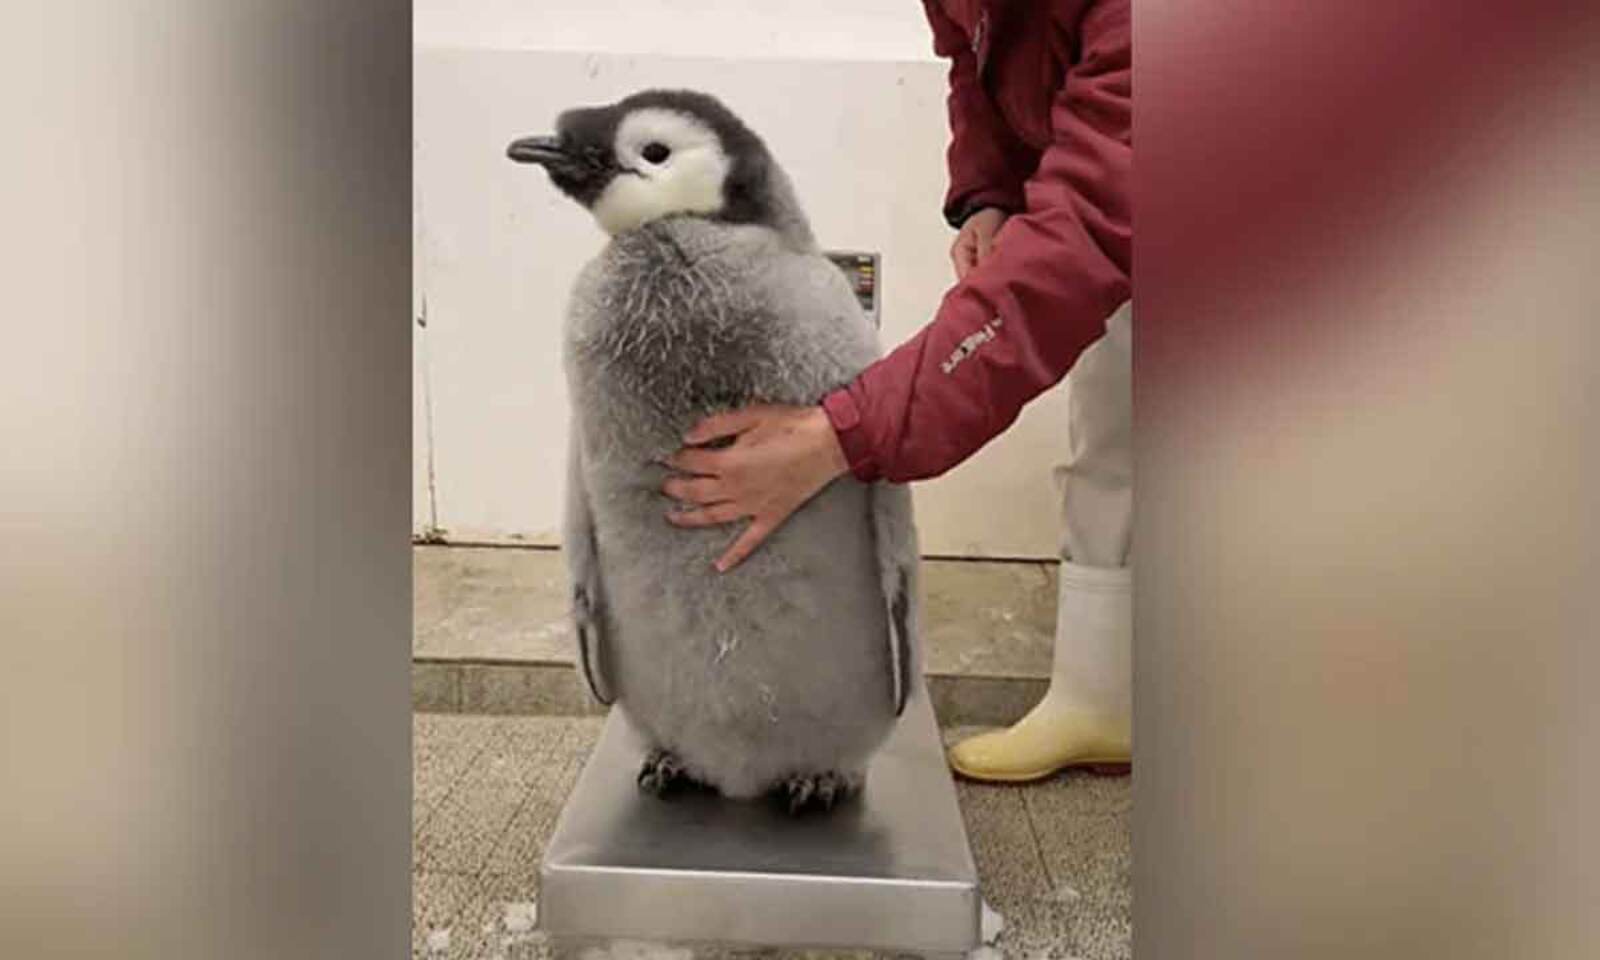 Watch The Trending Video Showing Struggle To Weigh The Baby Penguin